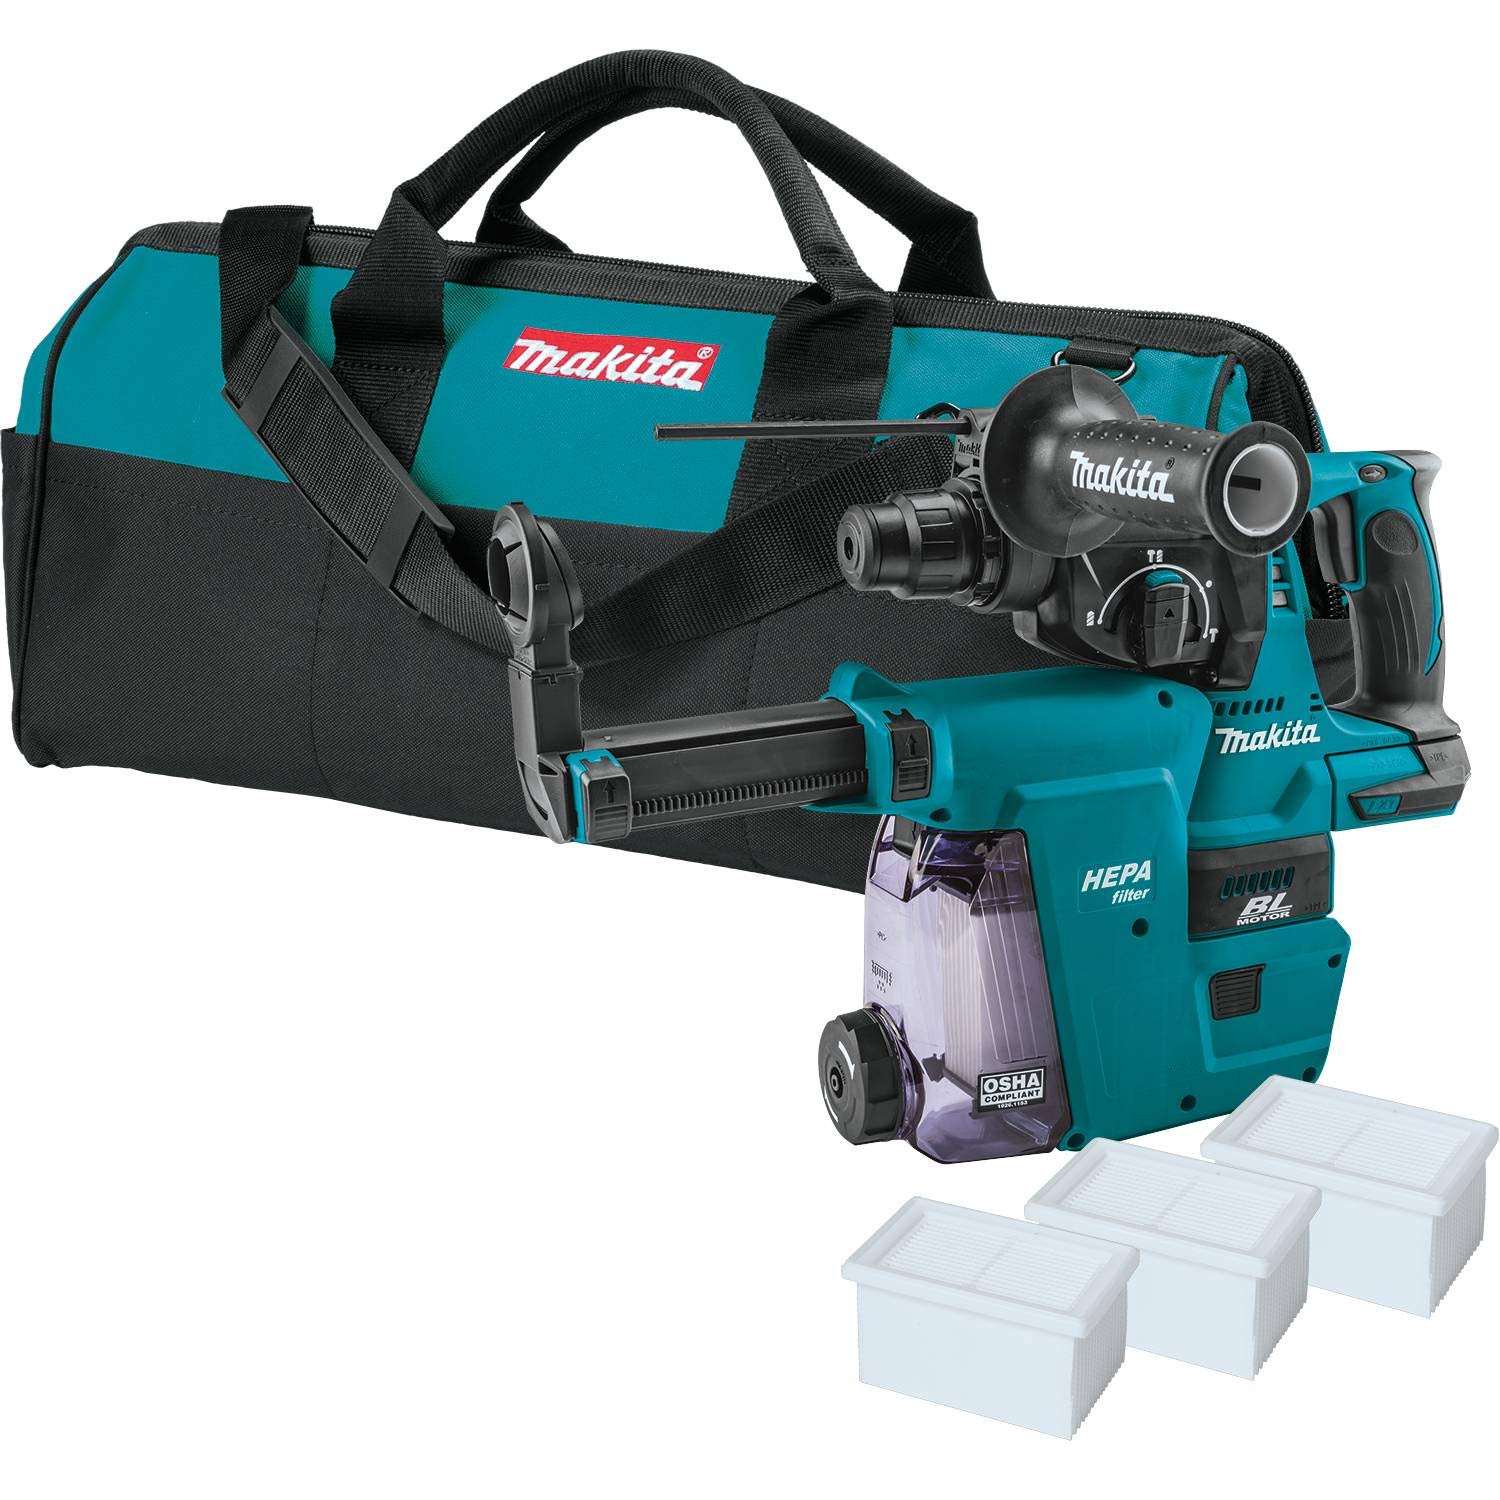 Makita XRH01ZWX 18V LXT Lithium-Ion Brushless Cordless 1 Rotary Hammer accepts SDS-PLUS bits wHEPA Dust Extractor Attac